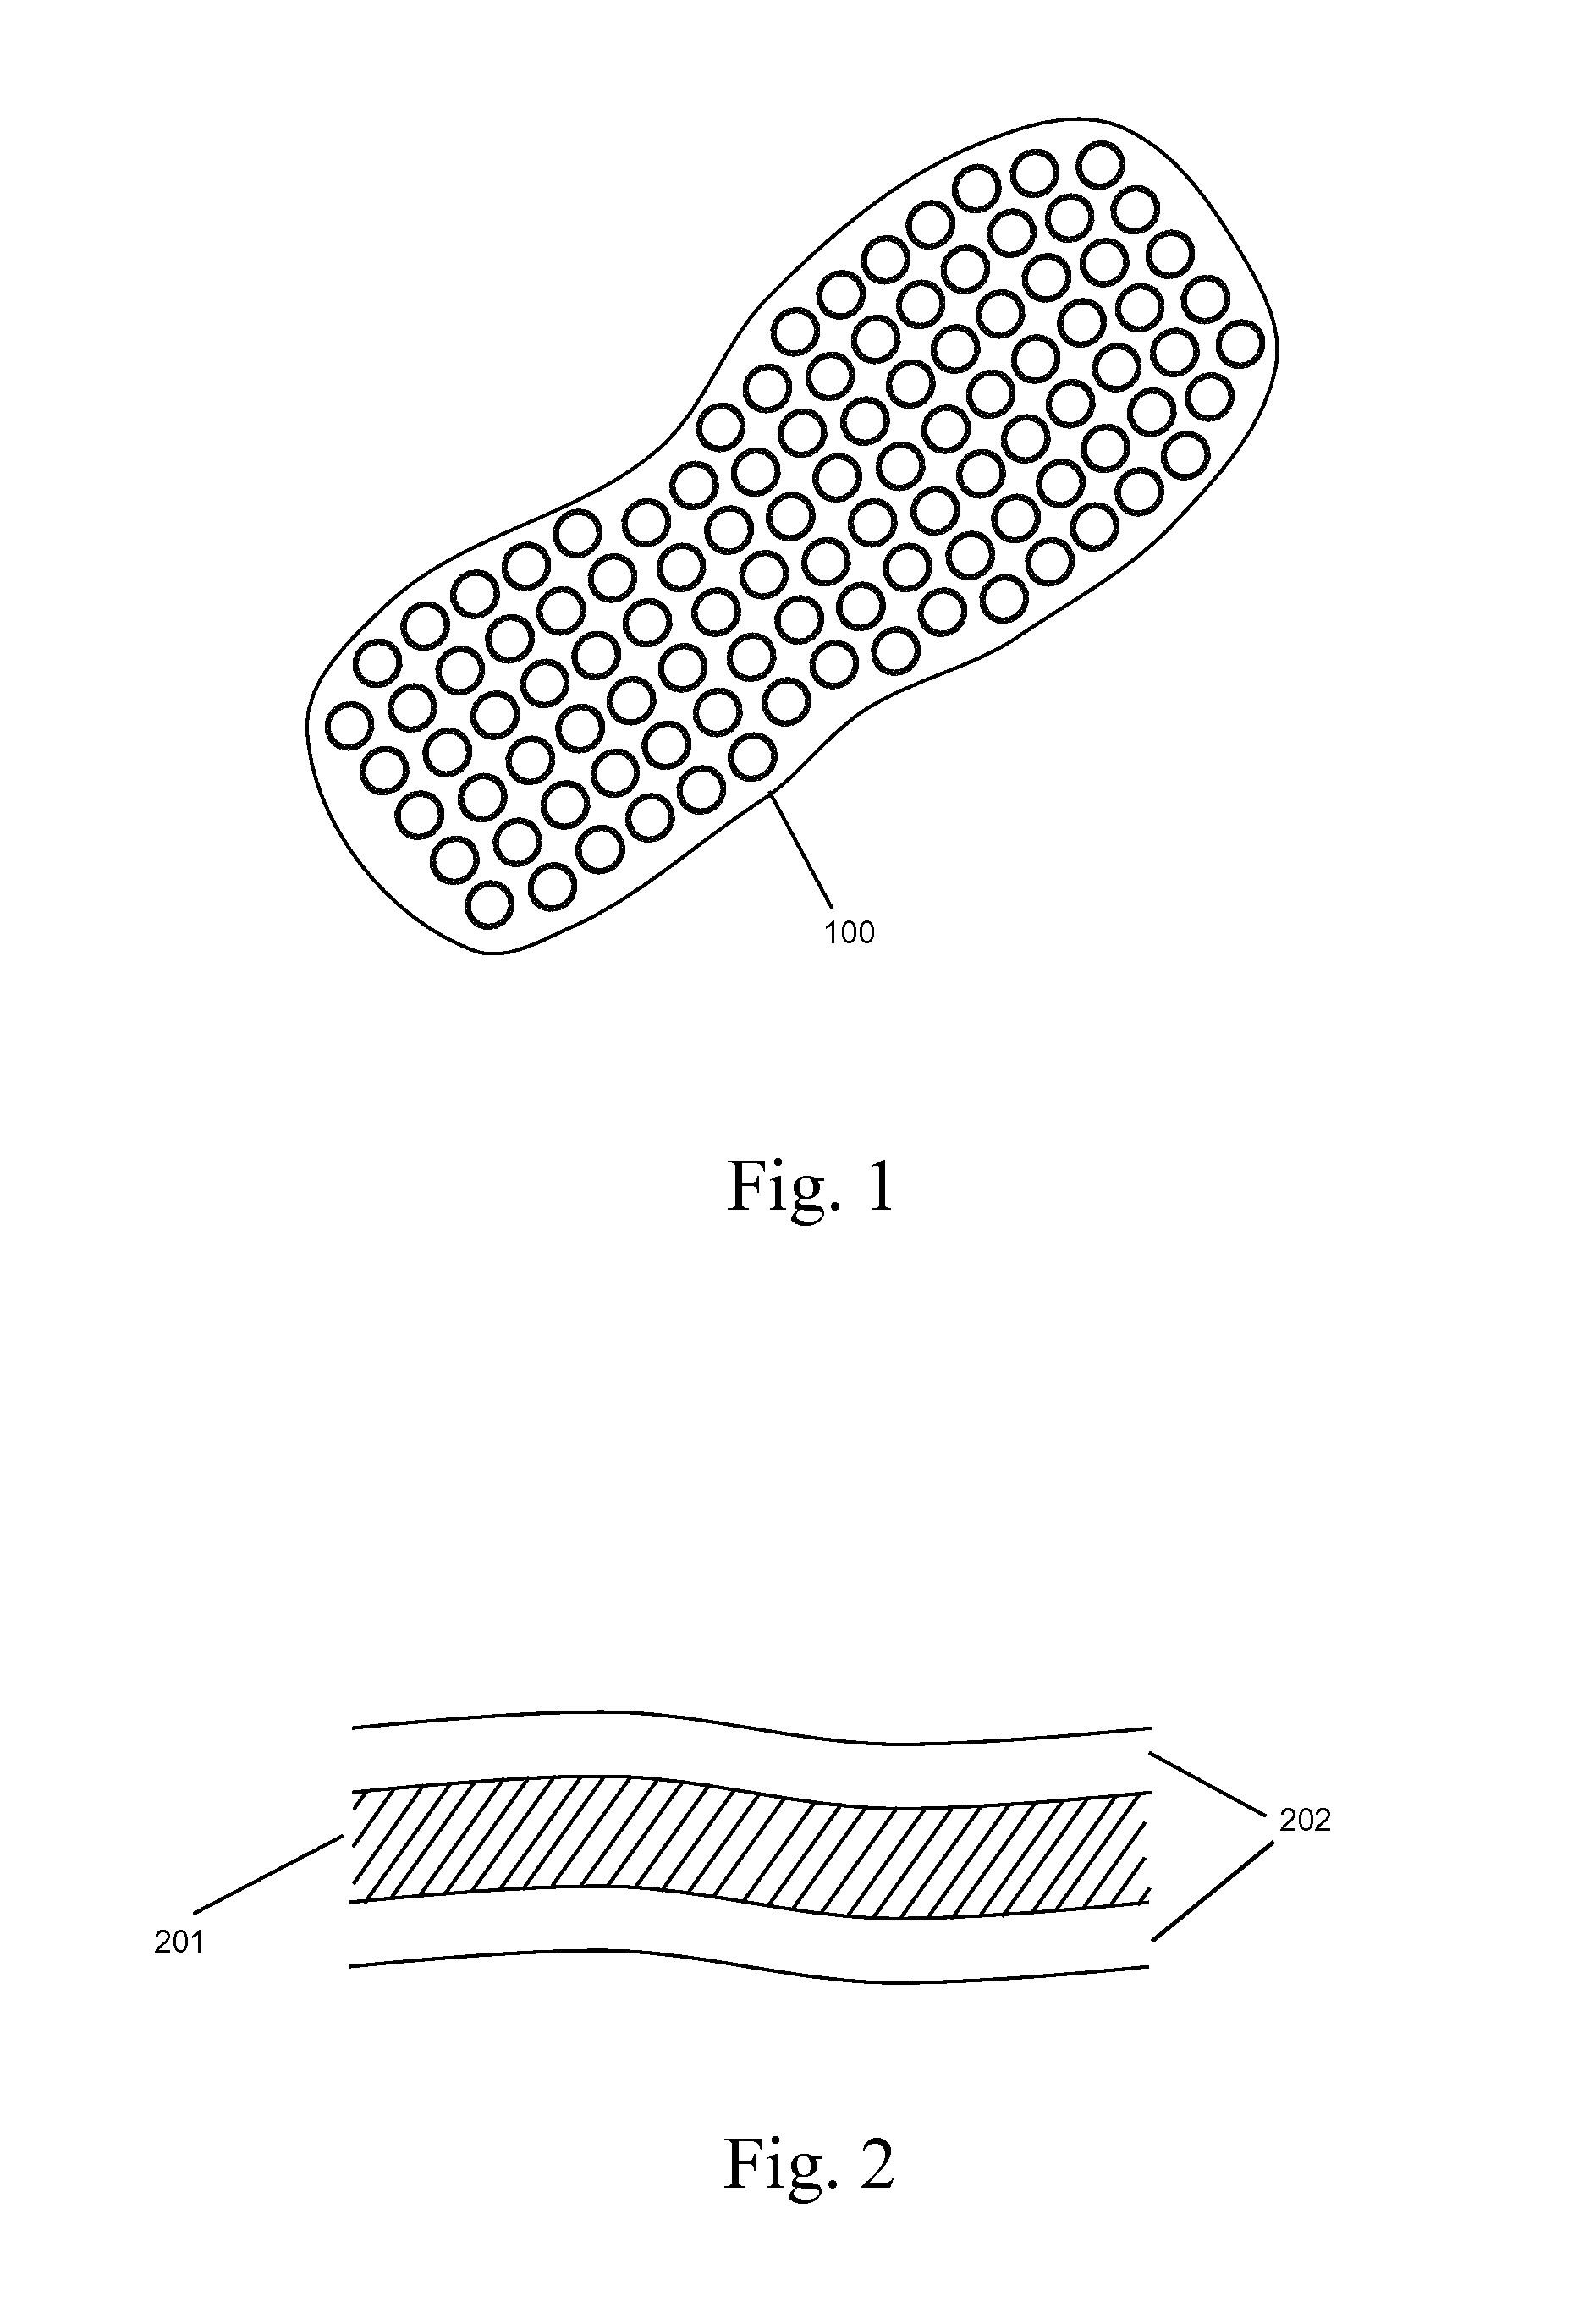 System and method for continuous monitoring of a human foot for signs of ulcer development